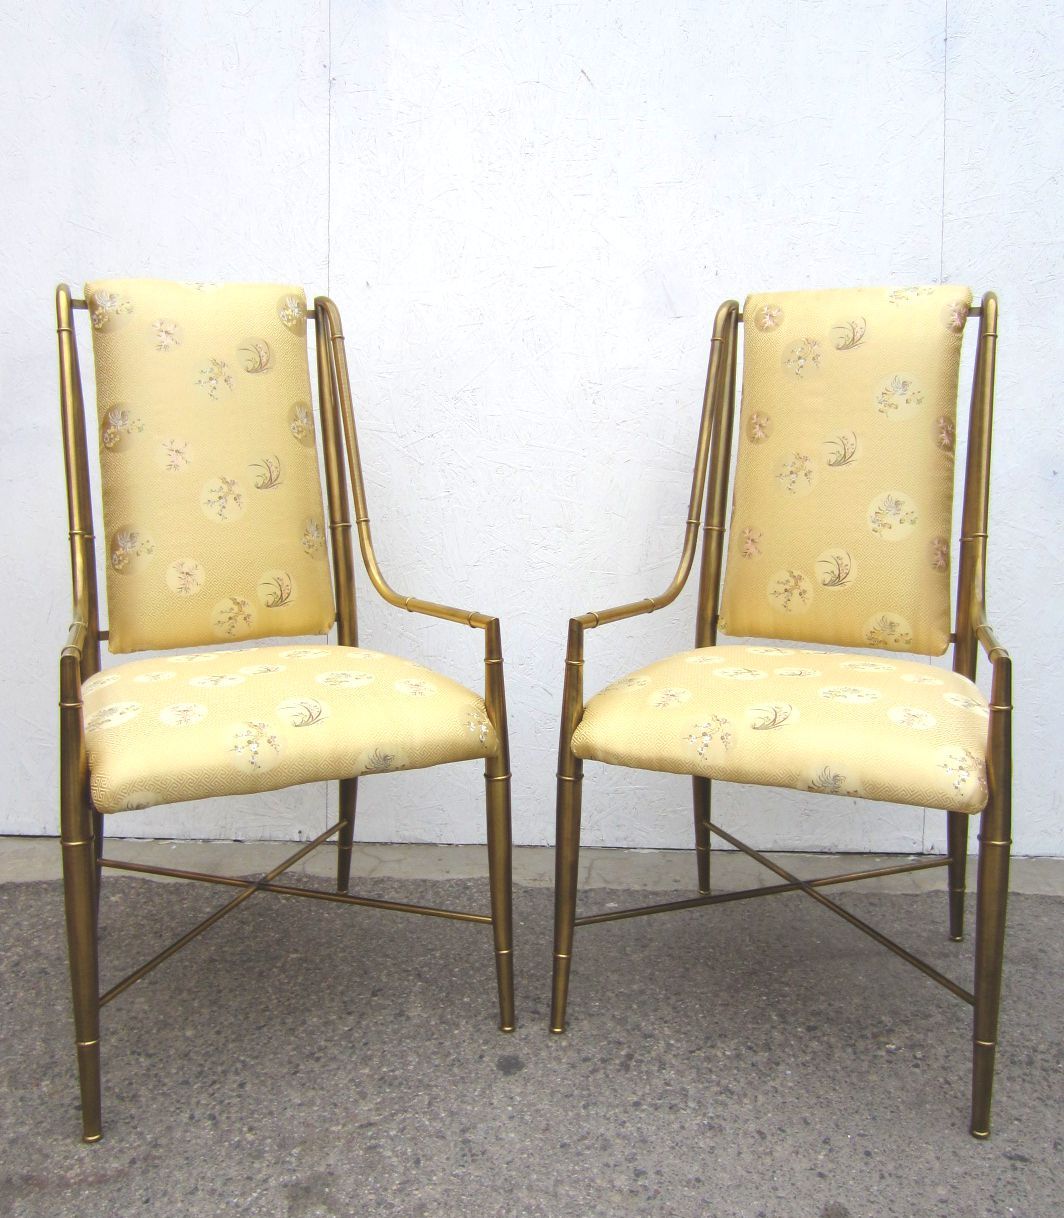 Set of six Mastercraft furniture brass faux bamboo armchairs.
Beautiful set in excellent original condition. No damage or cracks.
Brass has a warm aged patina.
Newer Asian inspired Greek key design silk upholstery.
One of the best looking and